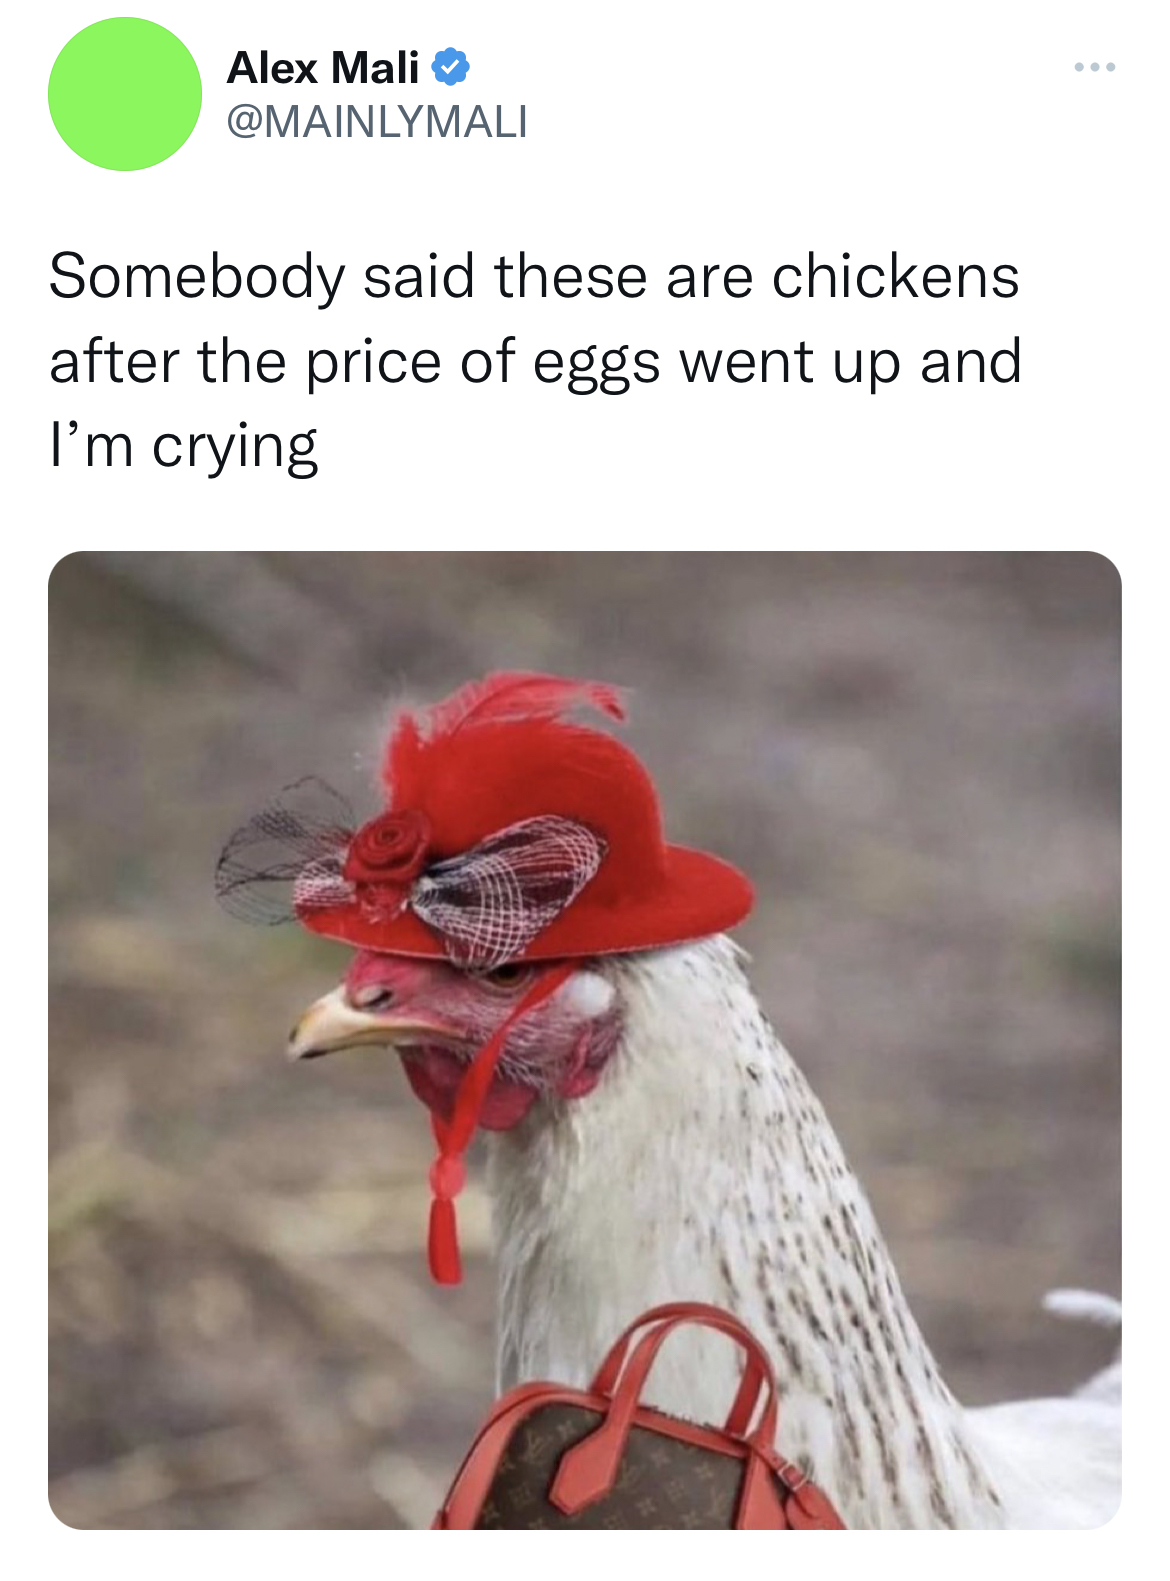 Egg Shortage 2023 memes - fauna - Alex Mali Somebody said these are chickens after the price of eggs went up and I'm crying